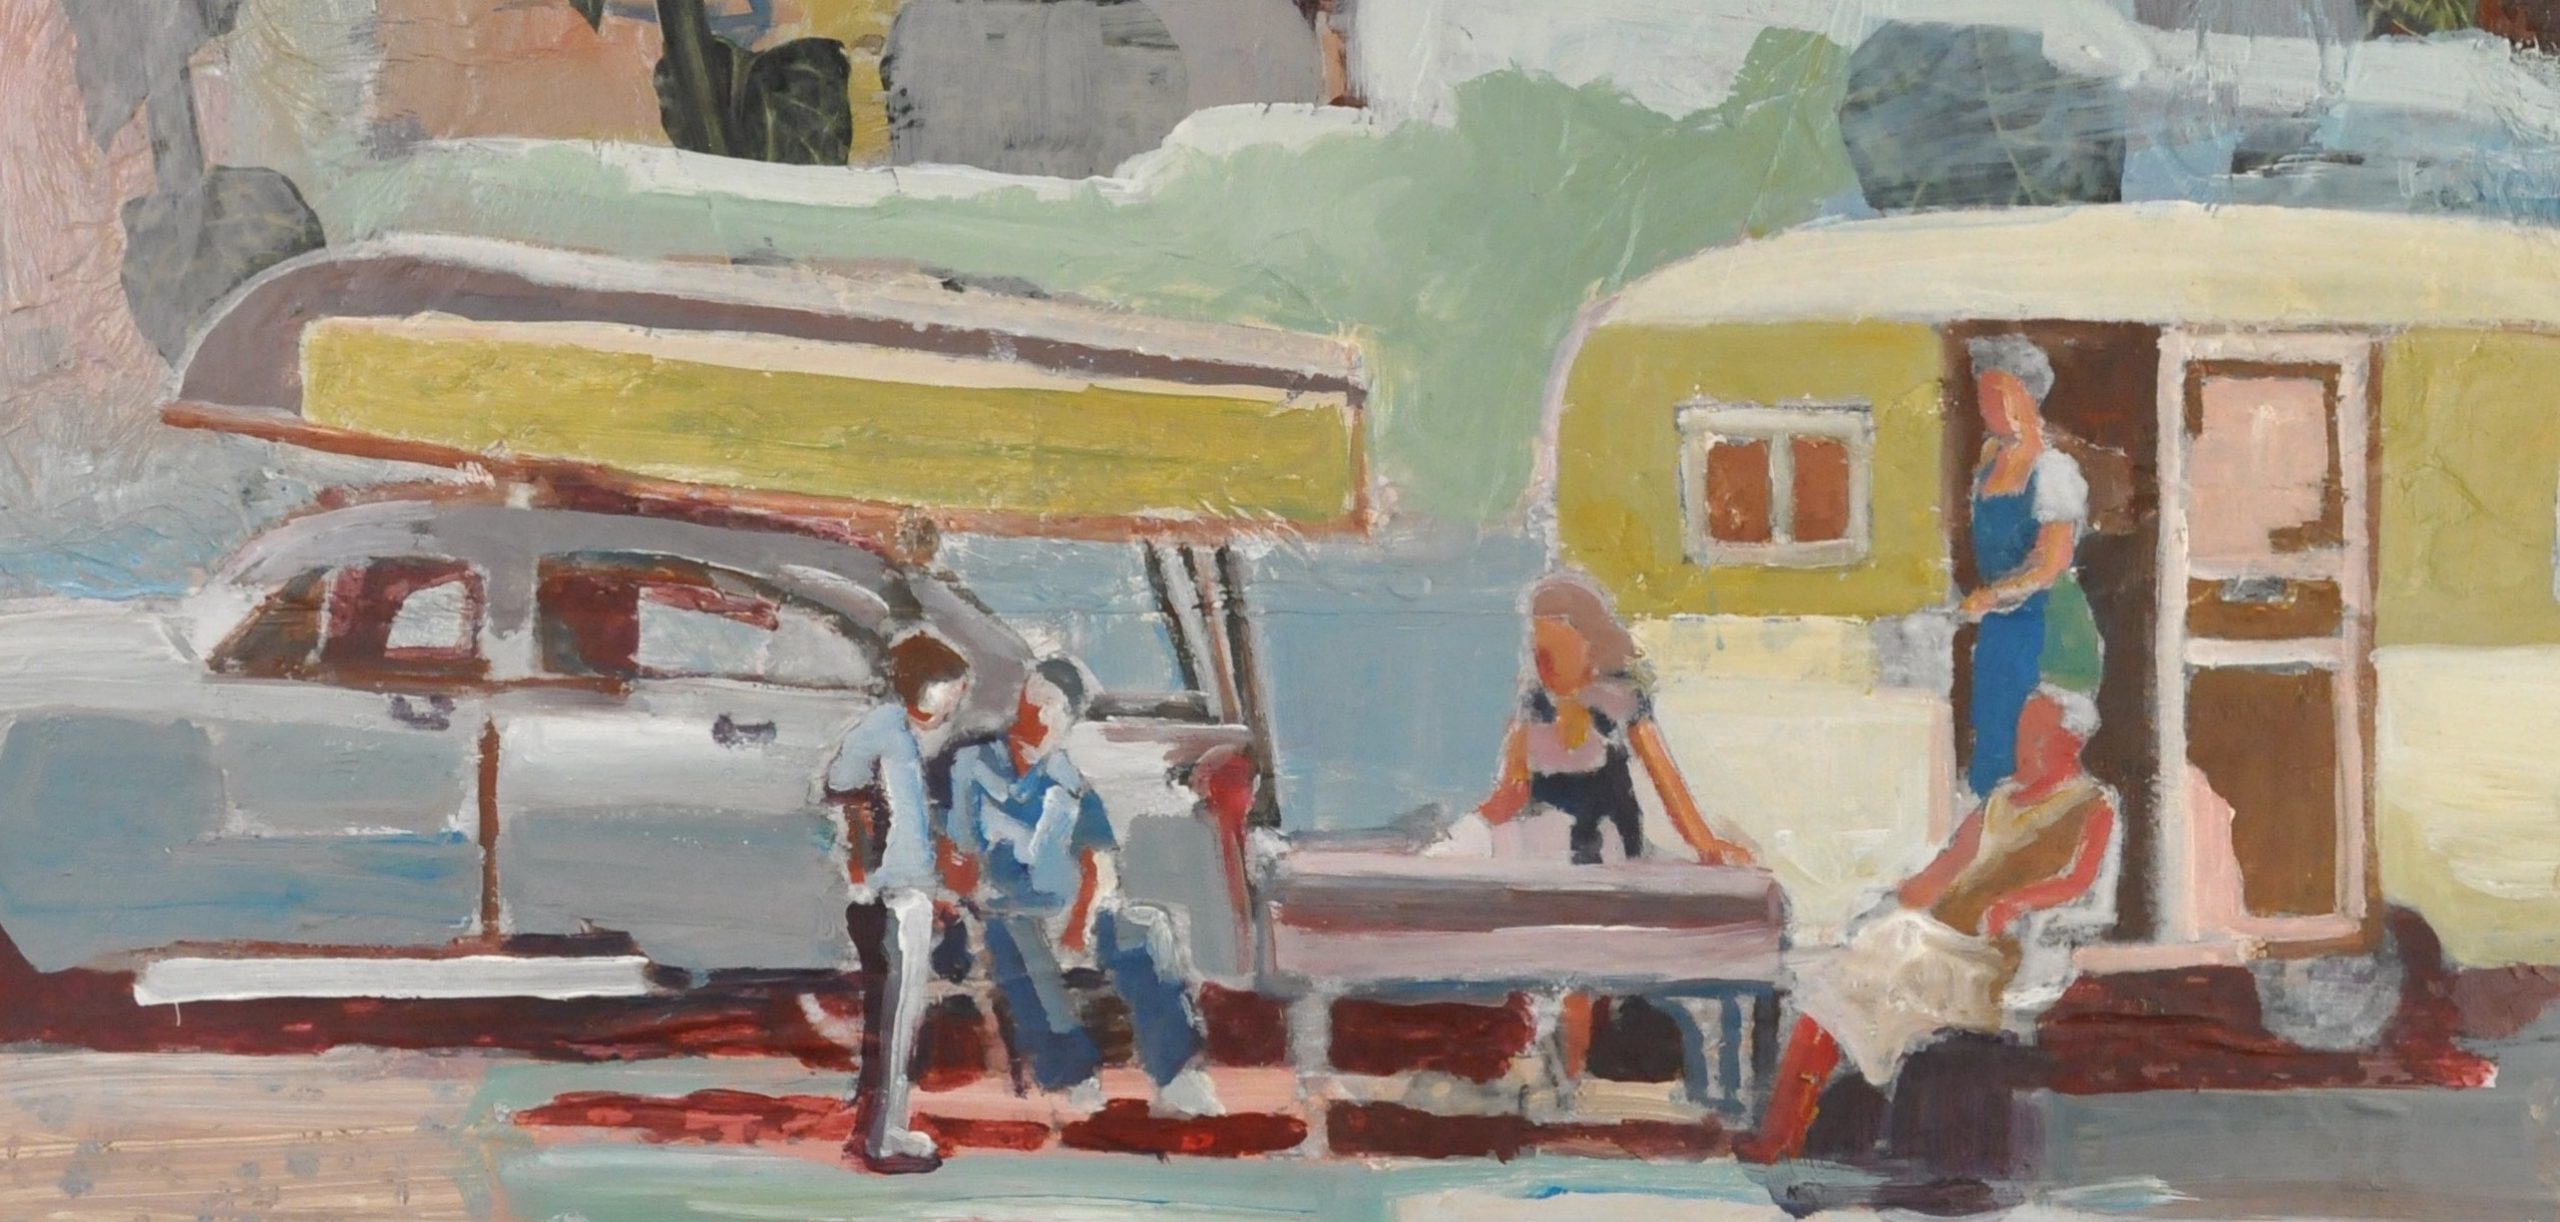 why art is important because it reminds you of escape. With a vintage camper, this pieces reminds you of escape.